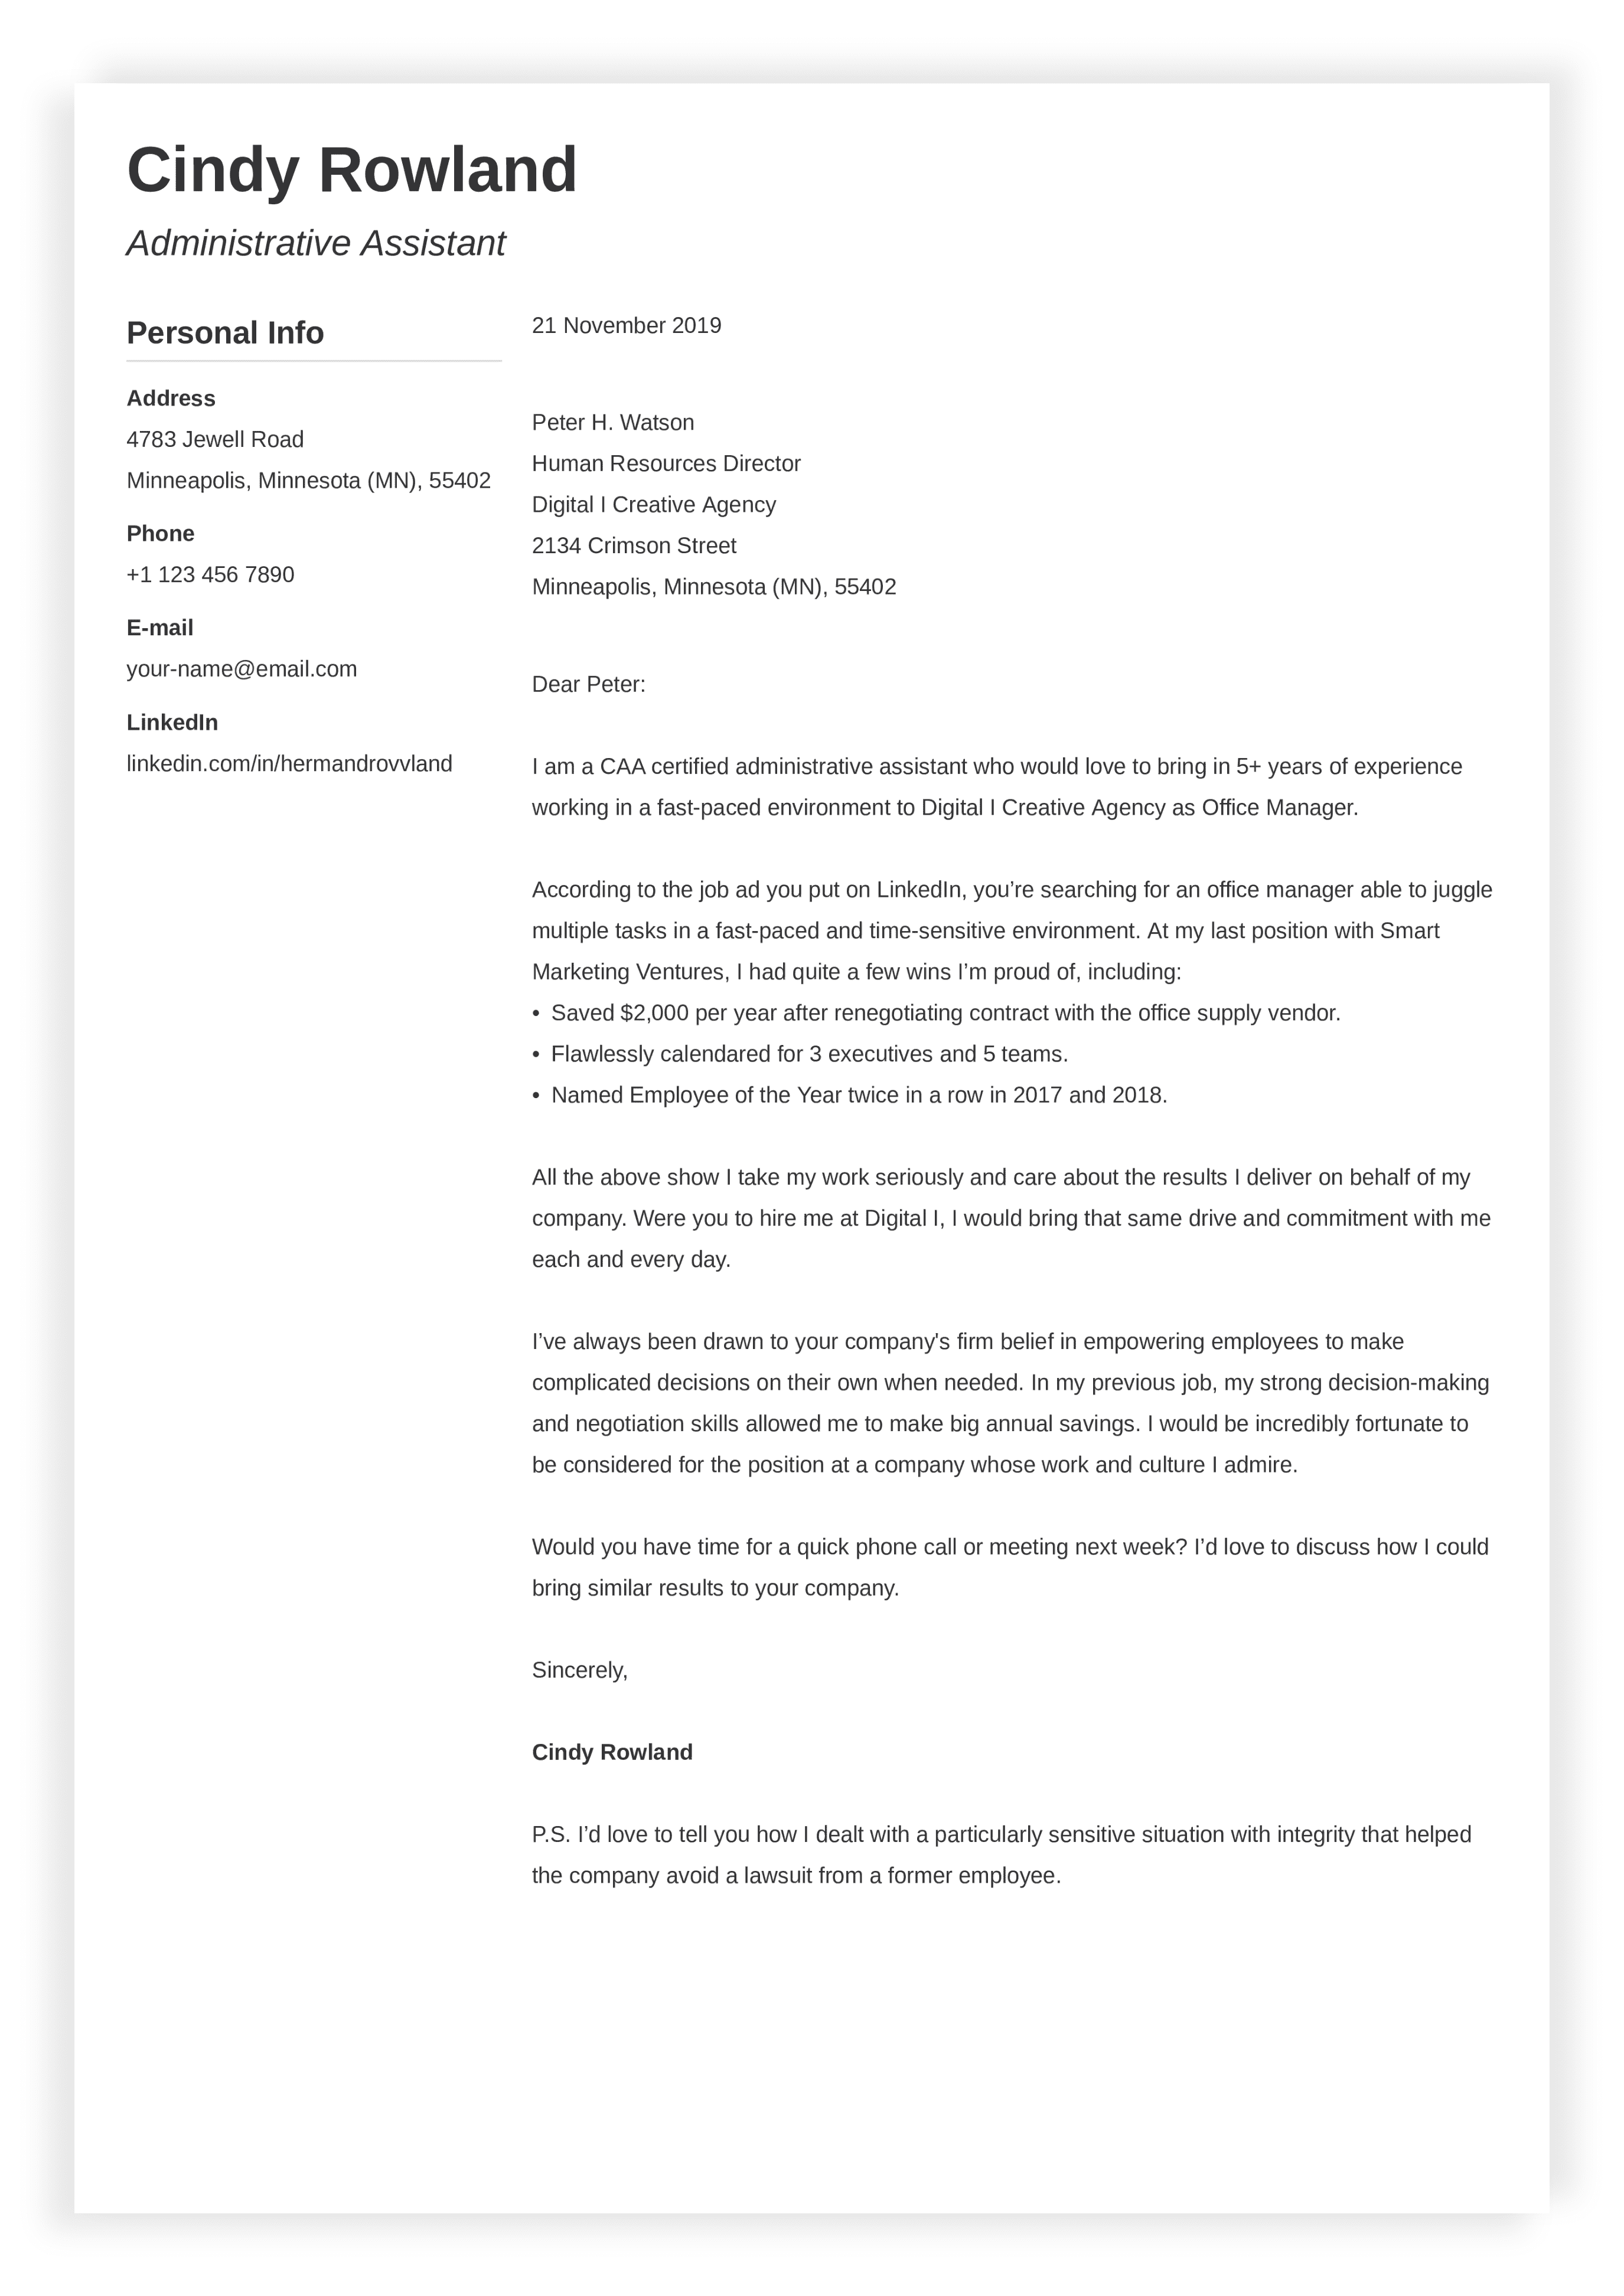 How to Write a Cover Letter for a Job in 2022 + Examples